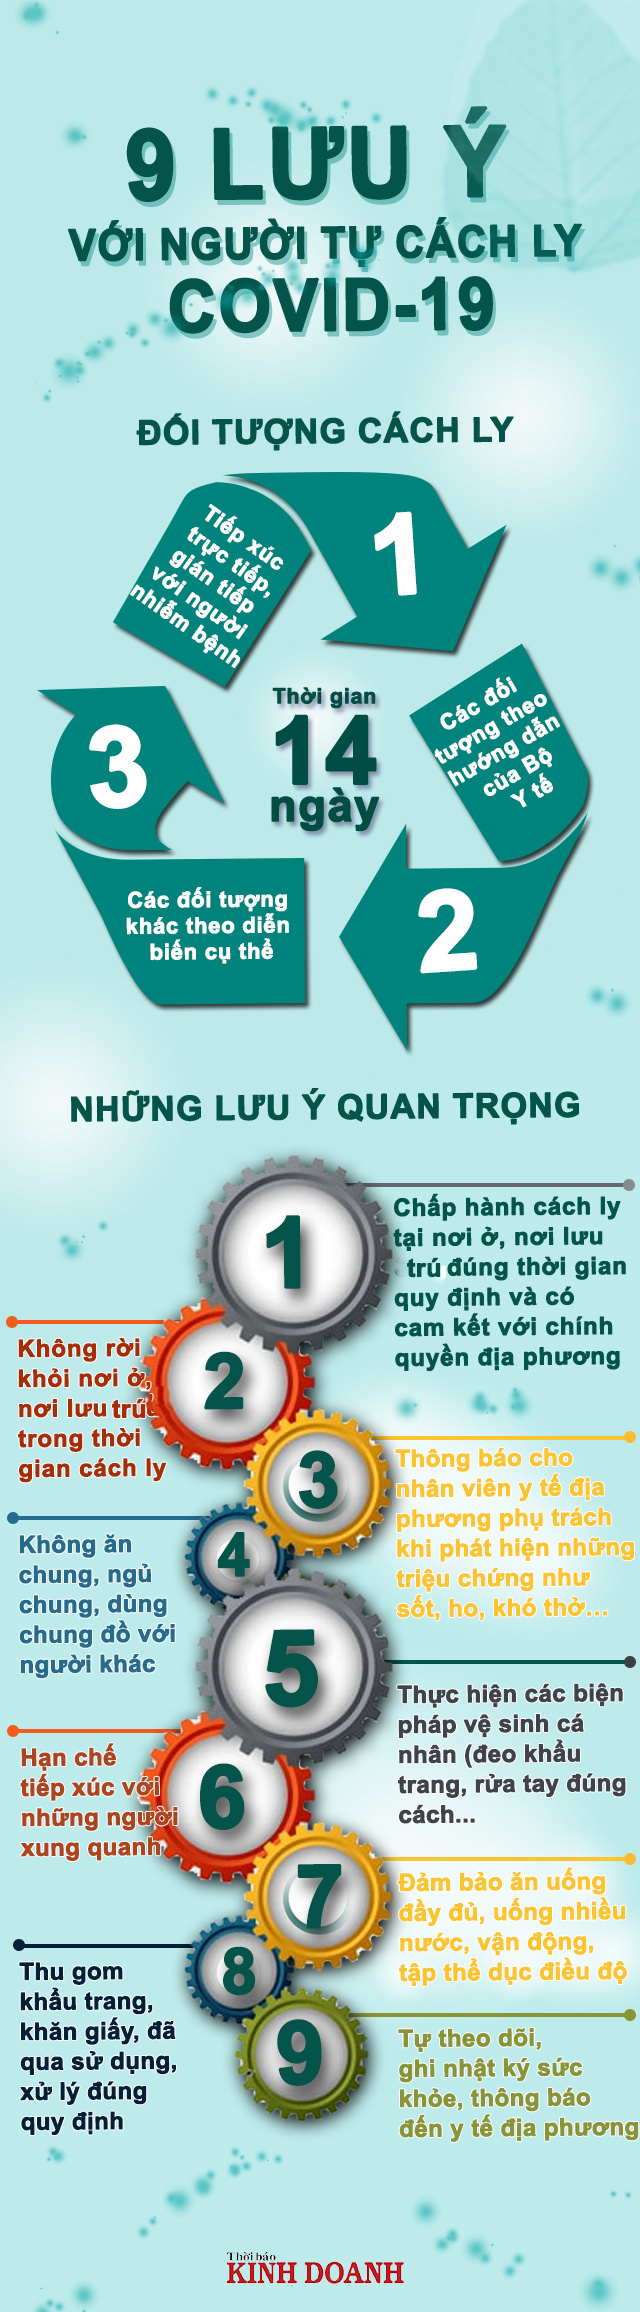 quy-dinh-doi-voi-nguoi-cach-ly-5868-4906